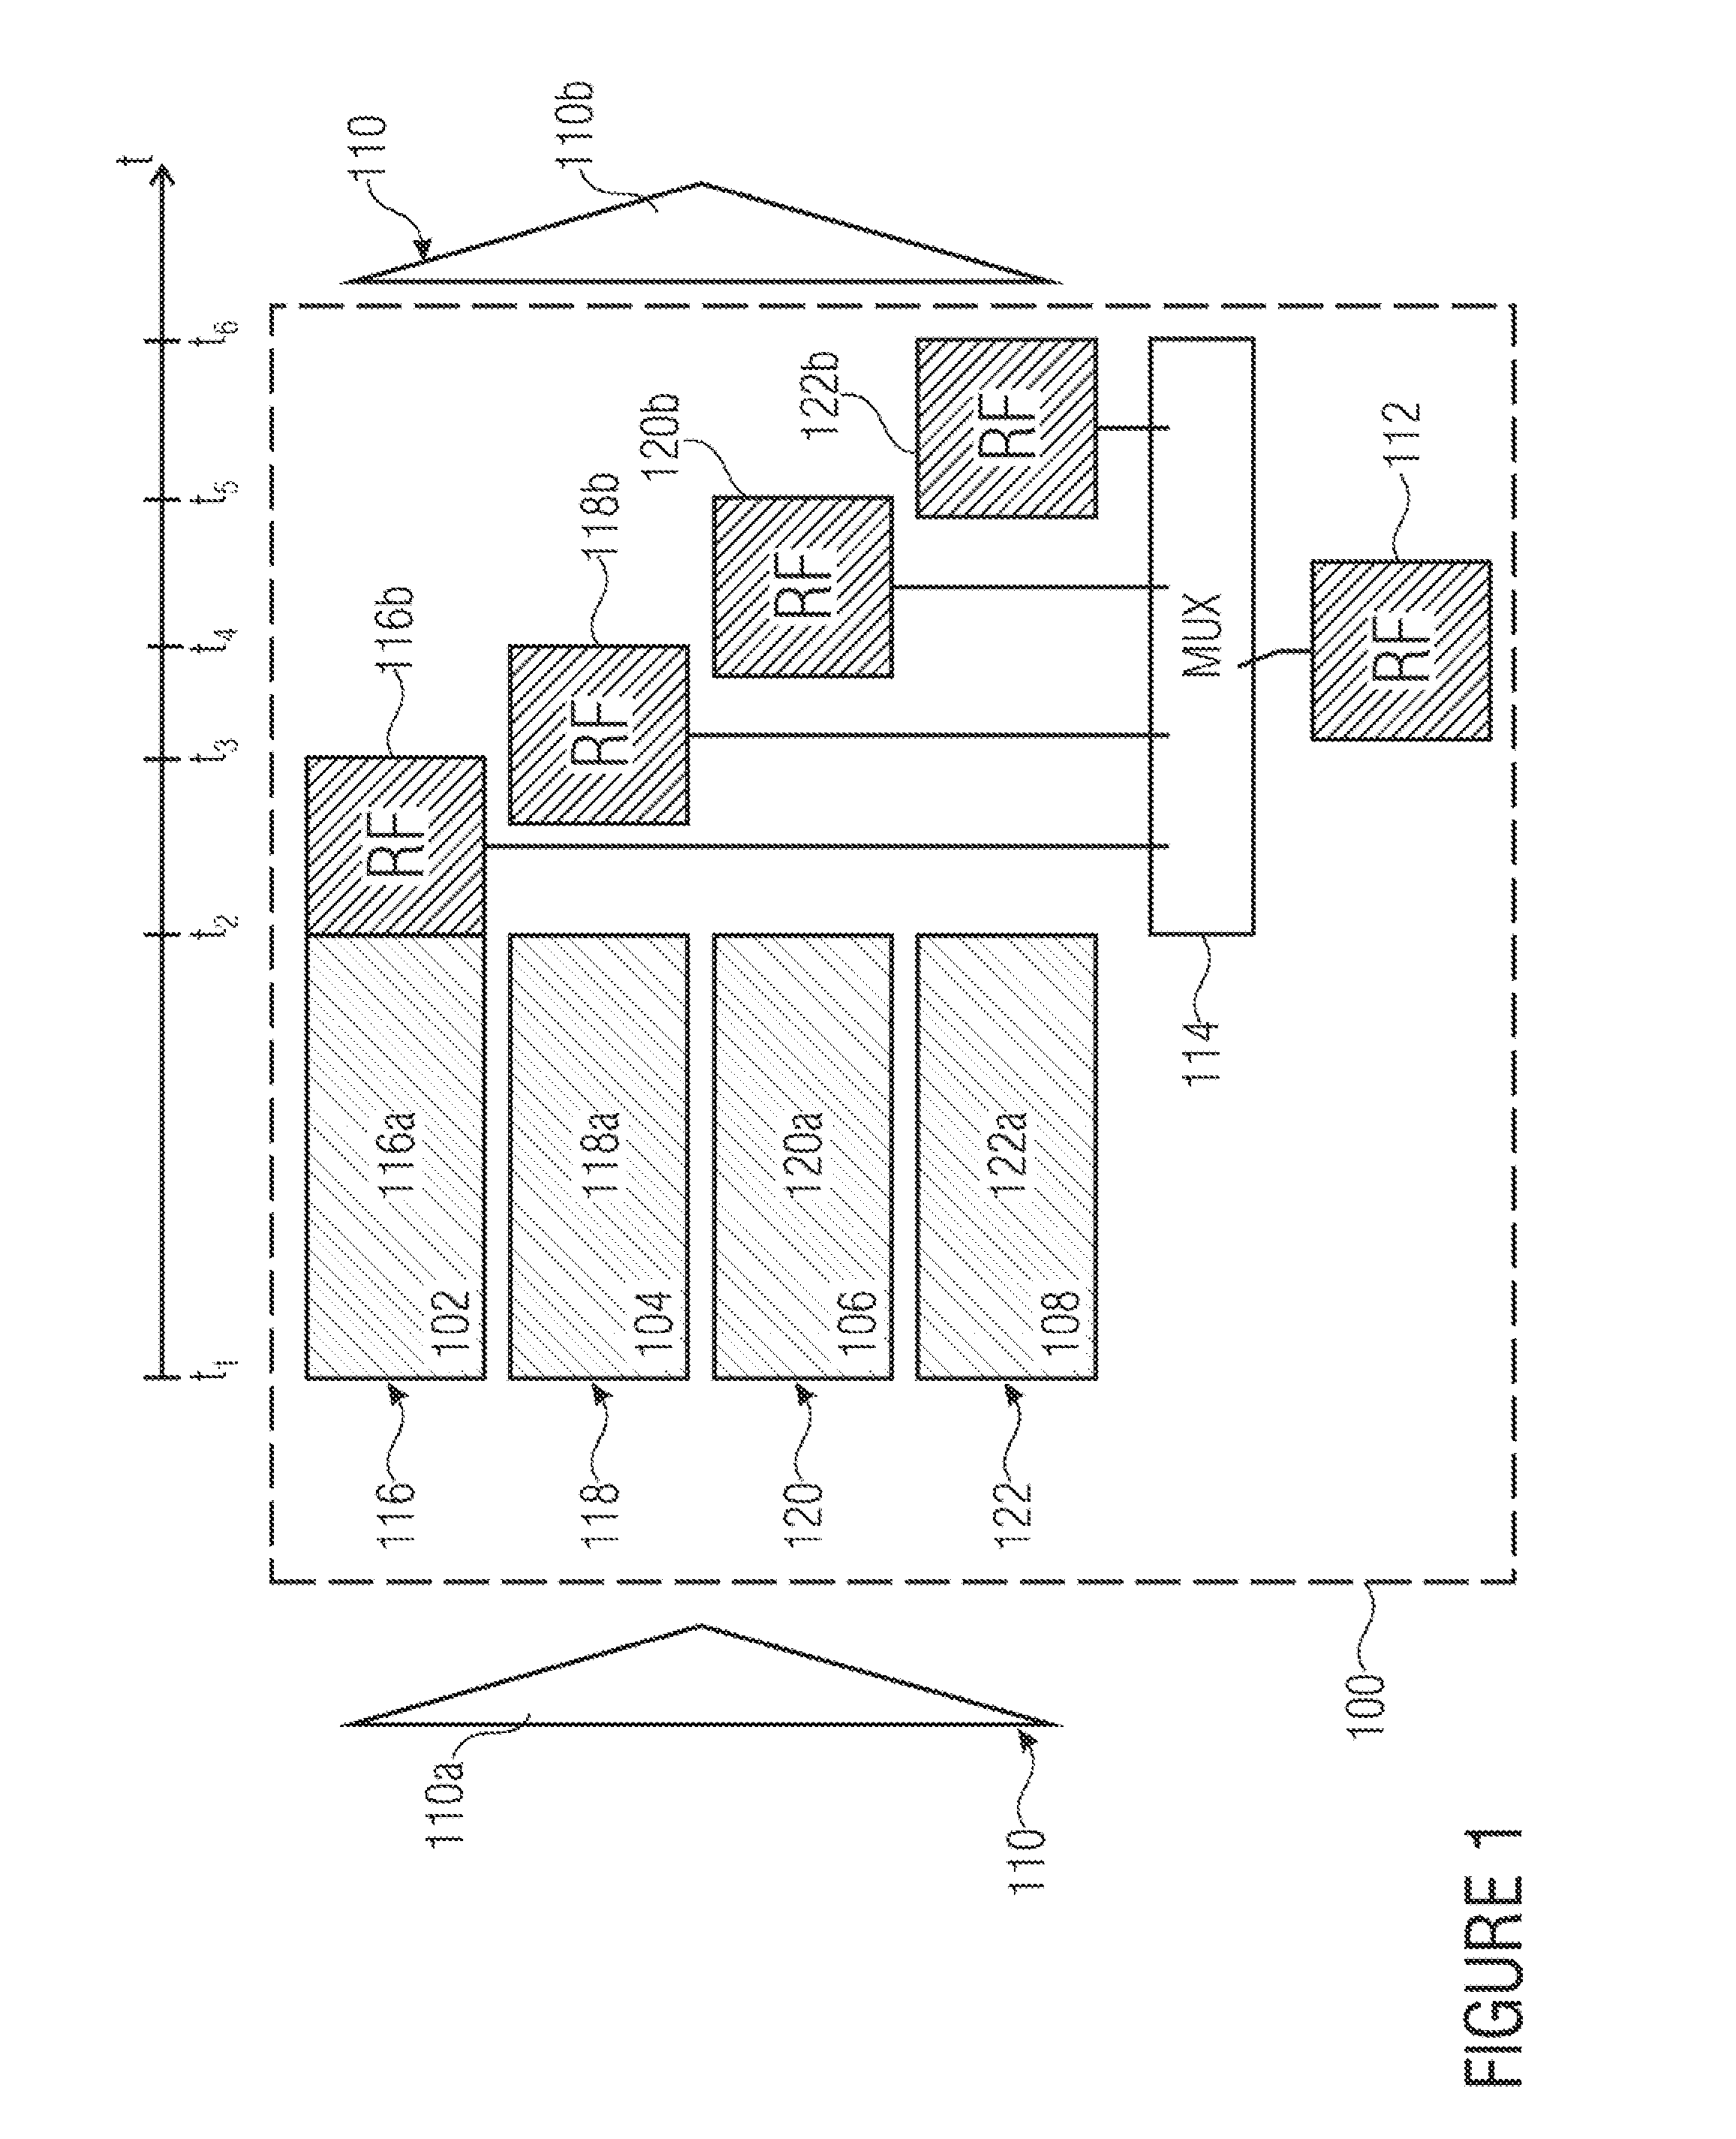 Method of sharing a test resource at a plurality of test sites, automated test equipment, handler for loading and unloading devices to be tested and test system